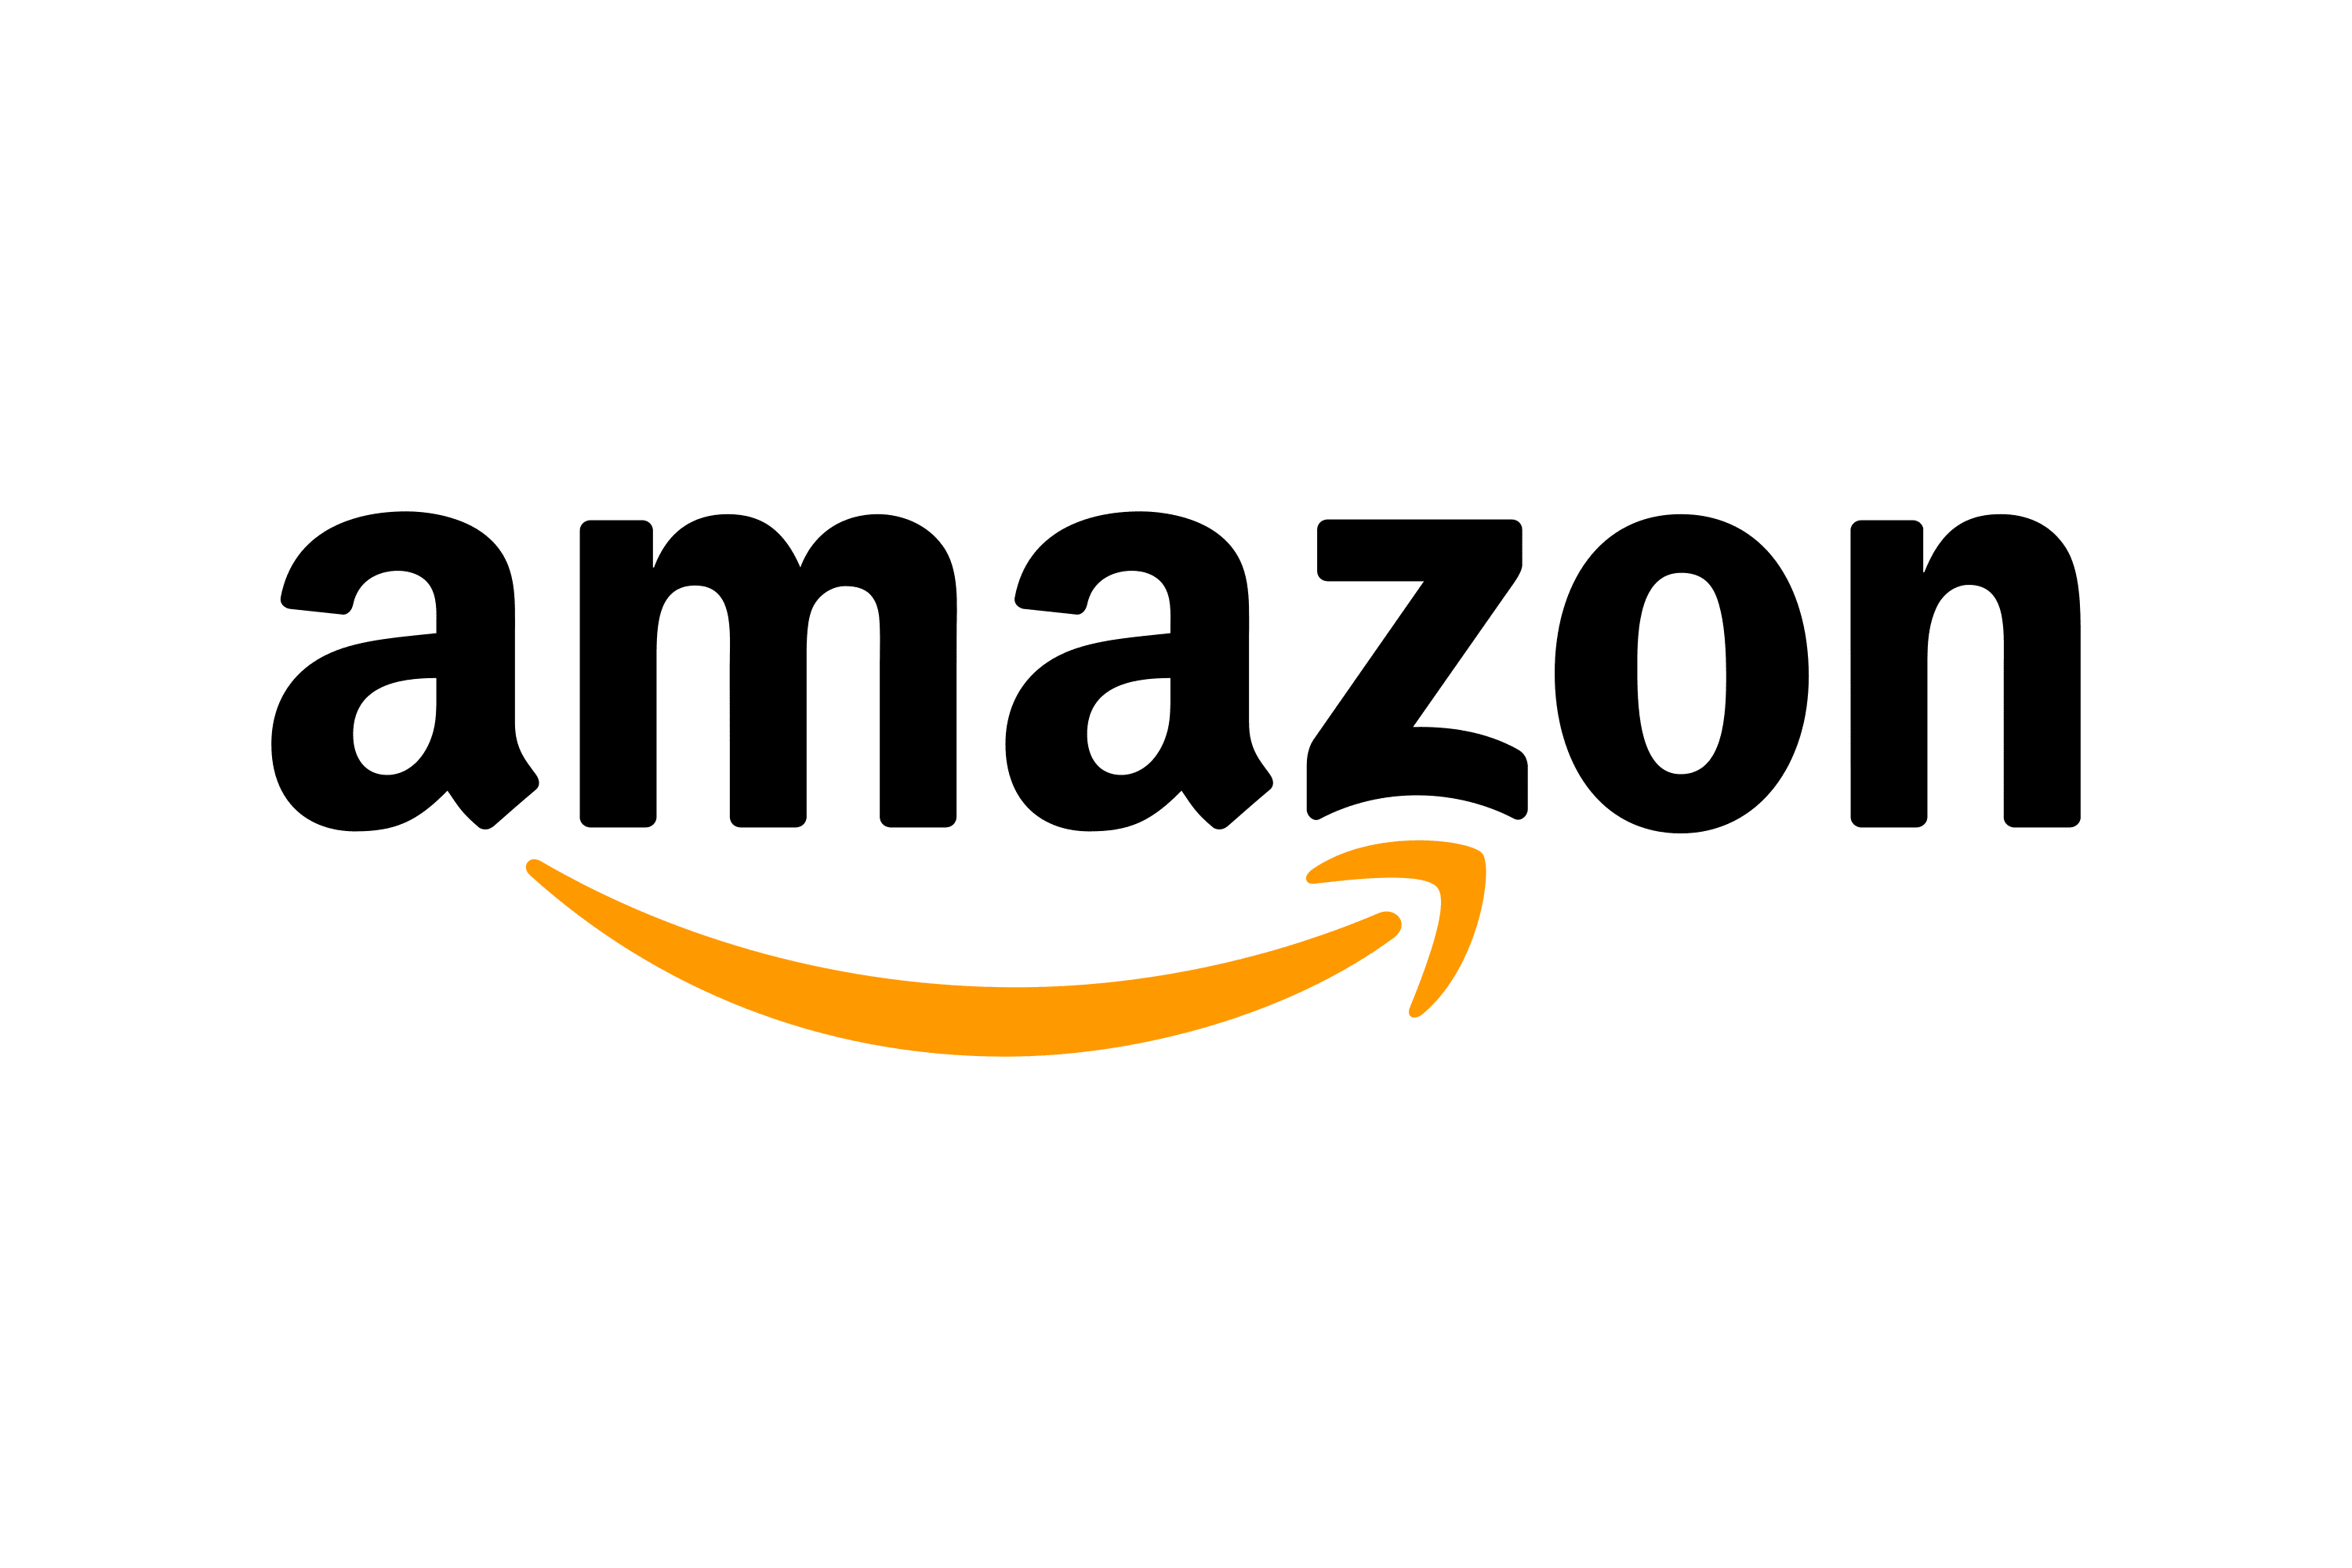 This is an image of the Amazon logo.